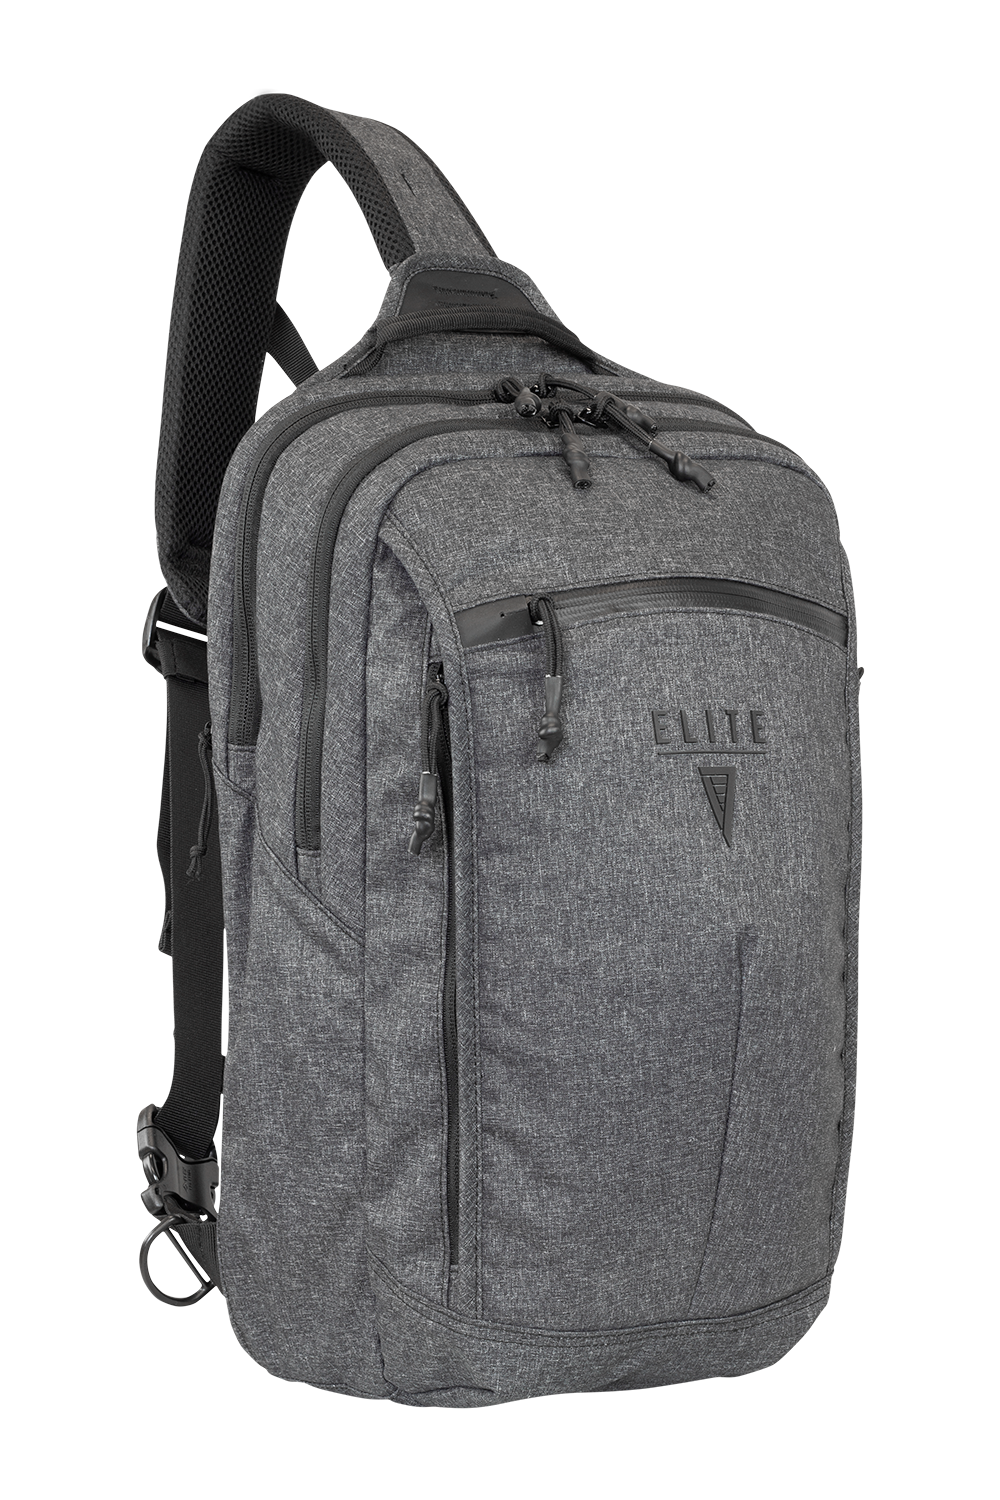 Smokescreen Concealed Carry Slingpack, gray color